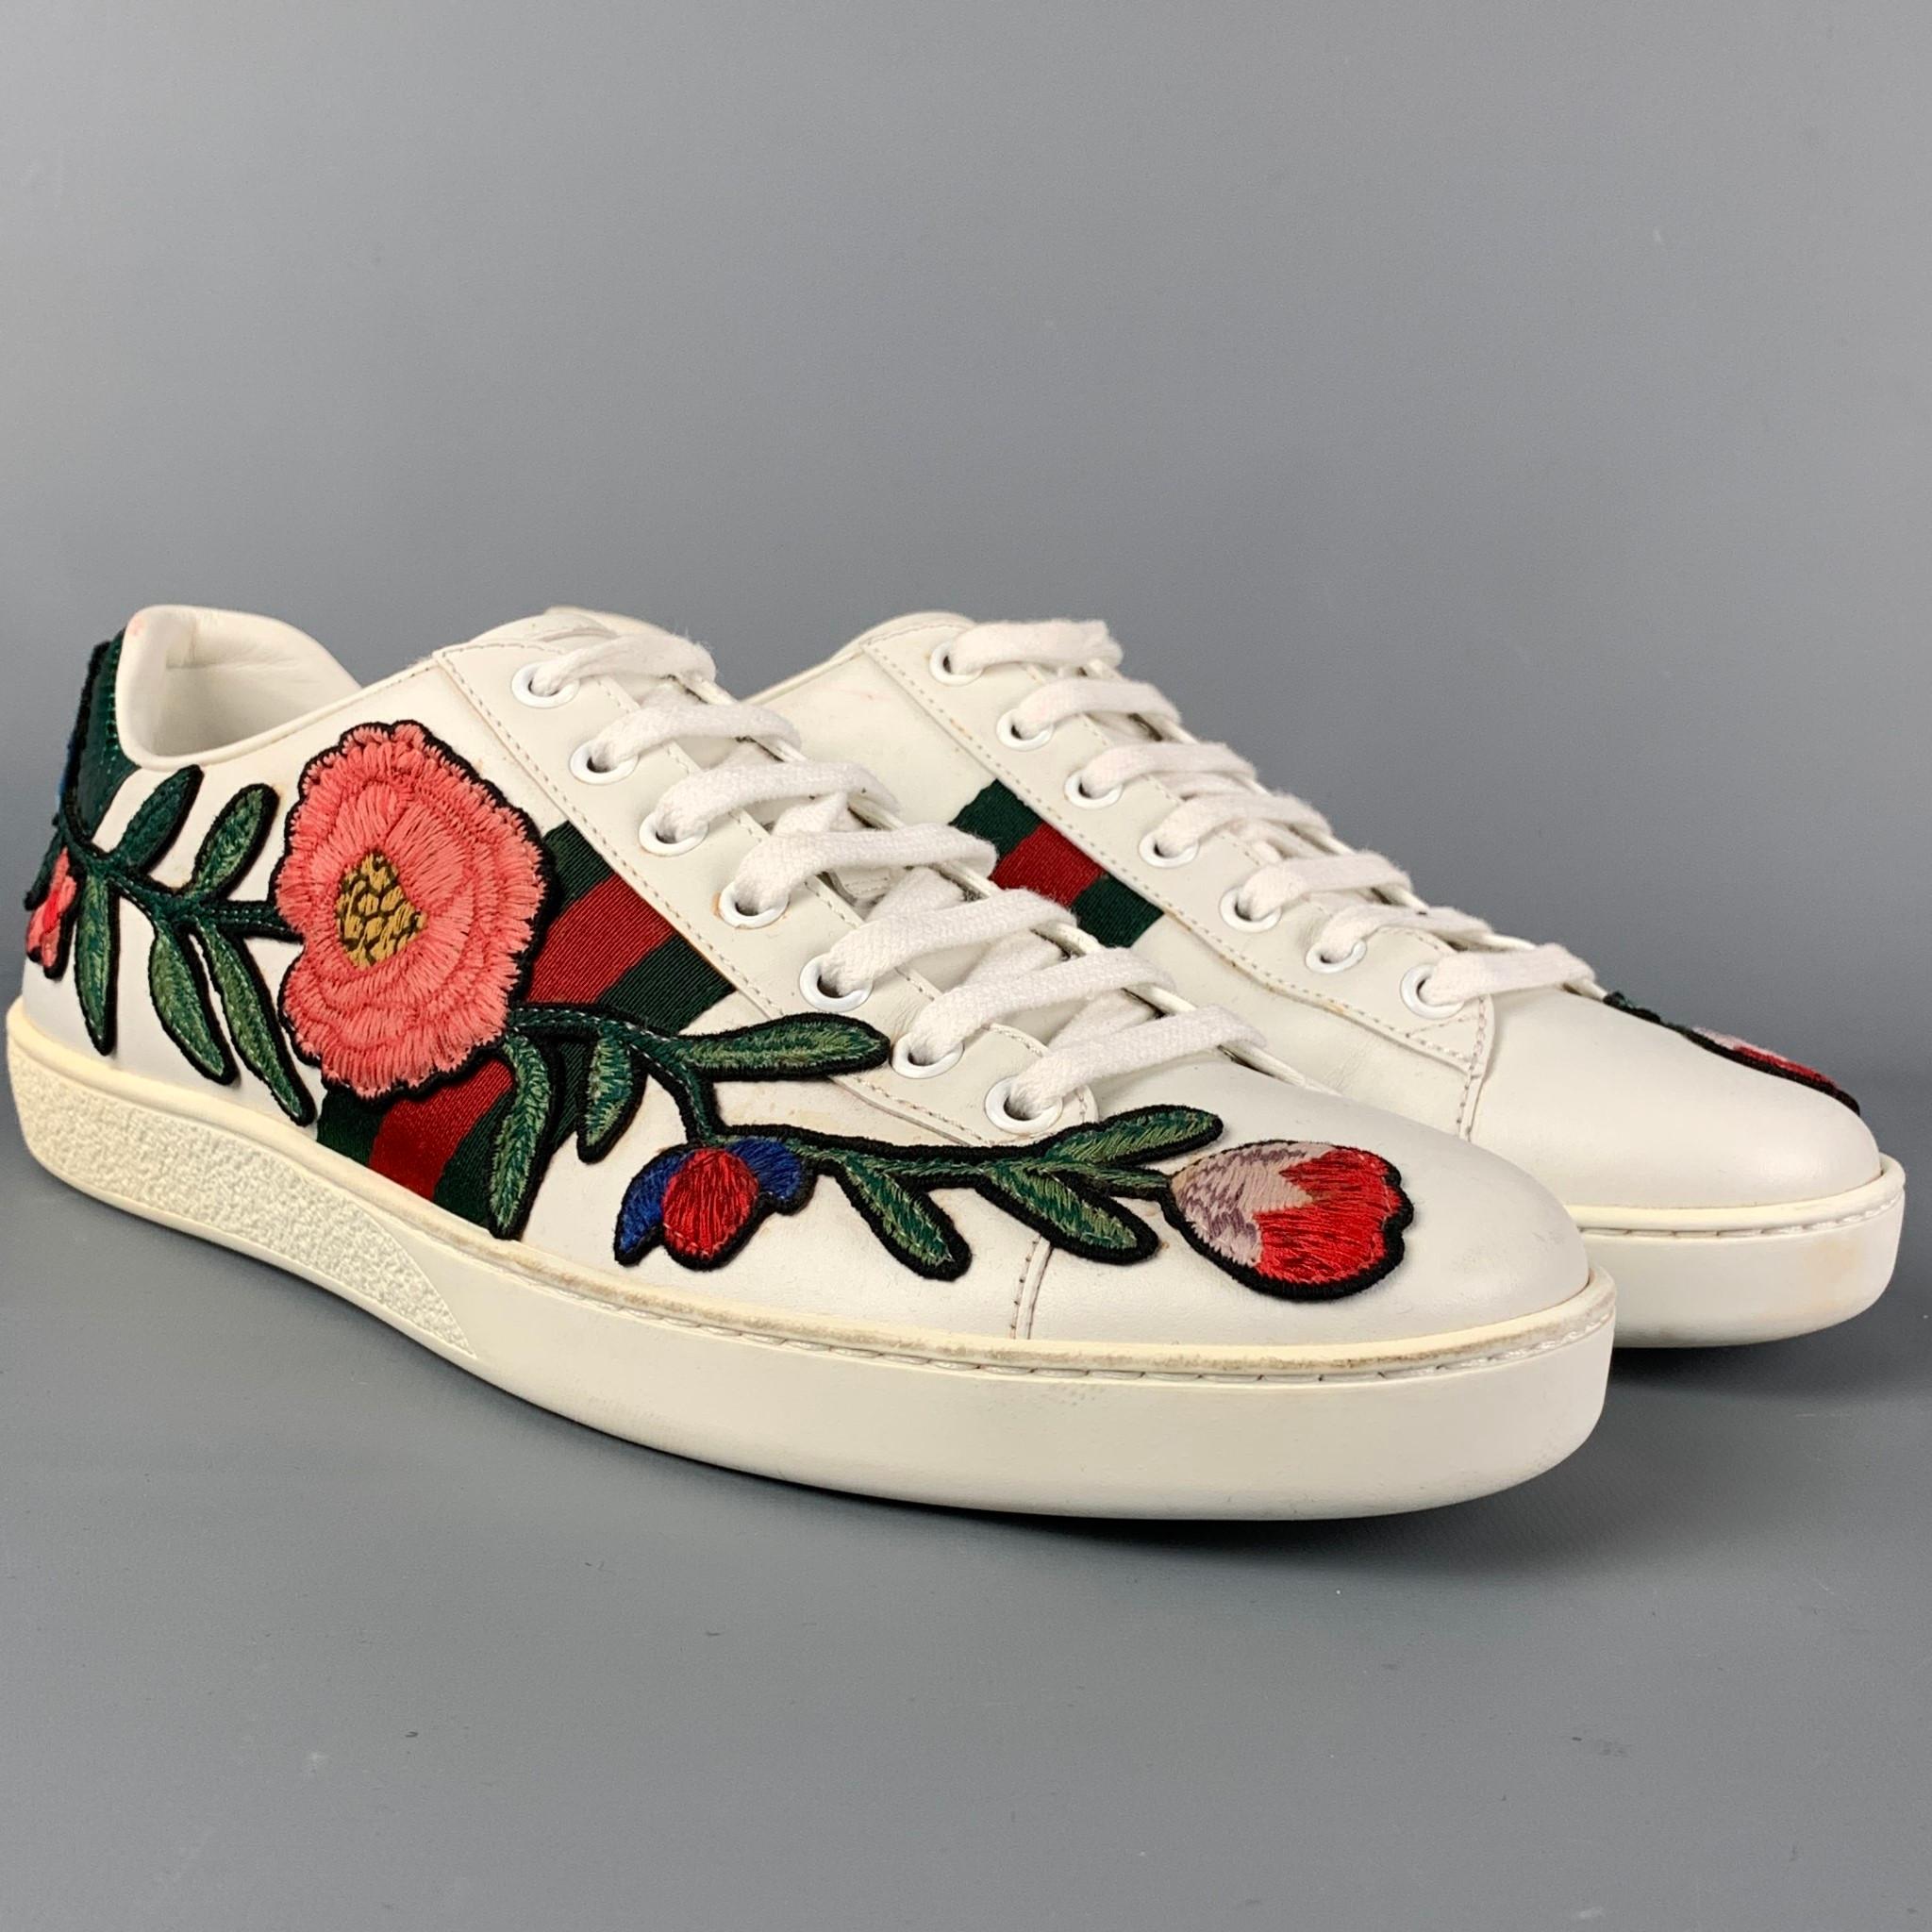 GUCCI sneakers comes in a multi-color leather featuring a floral embroidered design, signature stripe trim, rubber sole, and a lace up closure. Made in Italy. 

Very Good Pre-Owned Condition.
Marked: 431917 40 D
Original Retail Price: